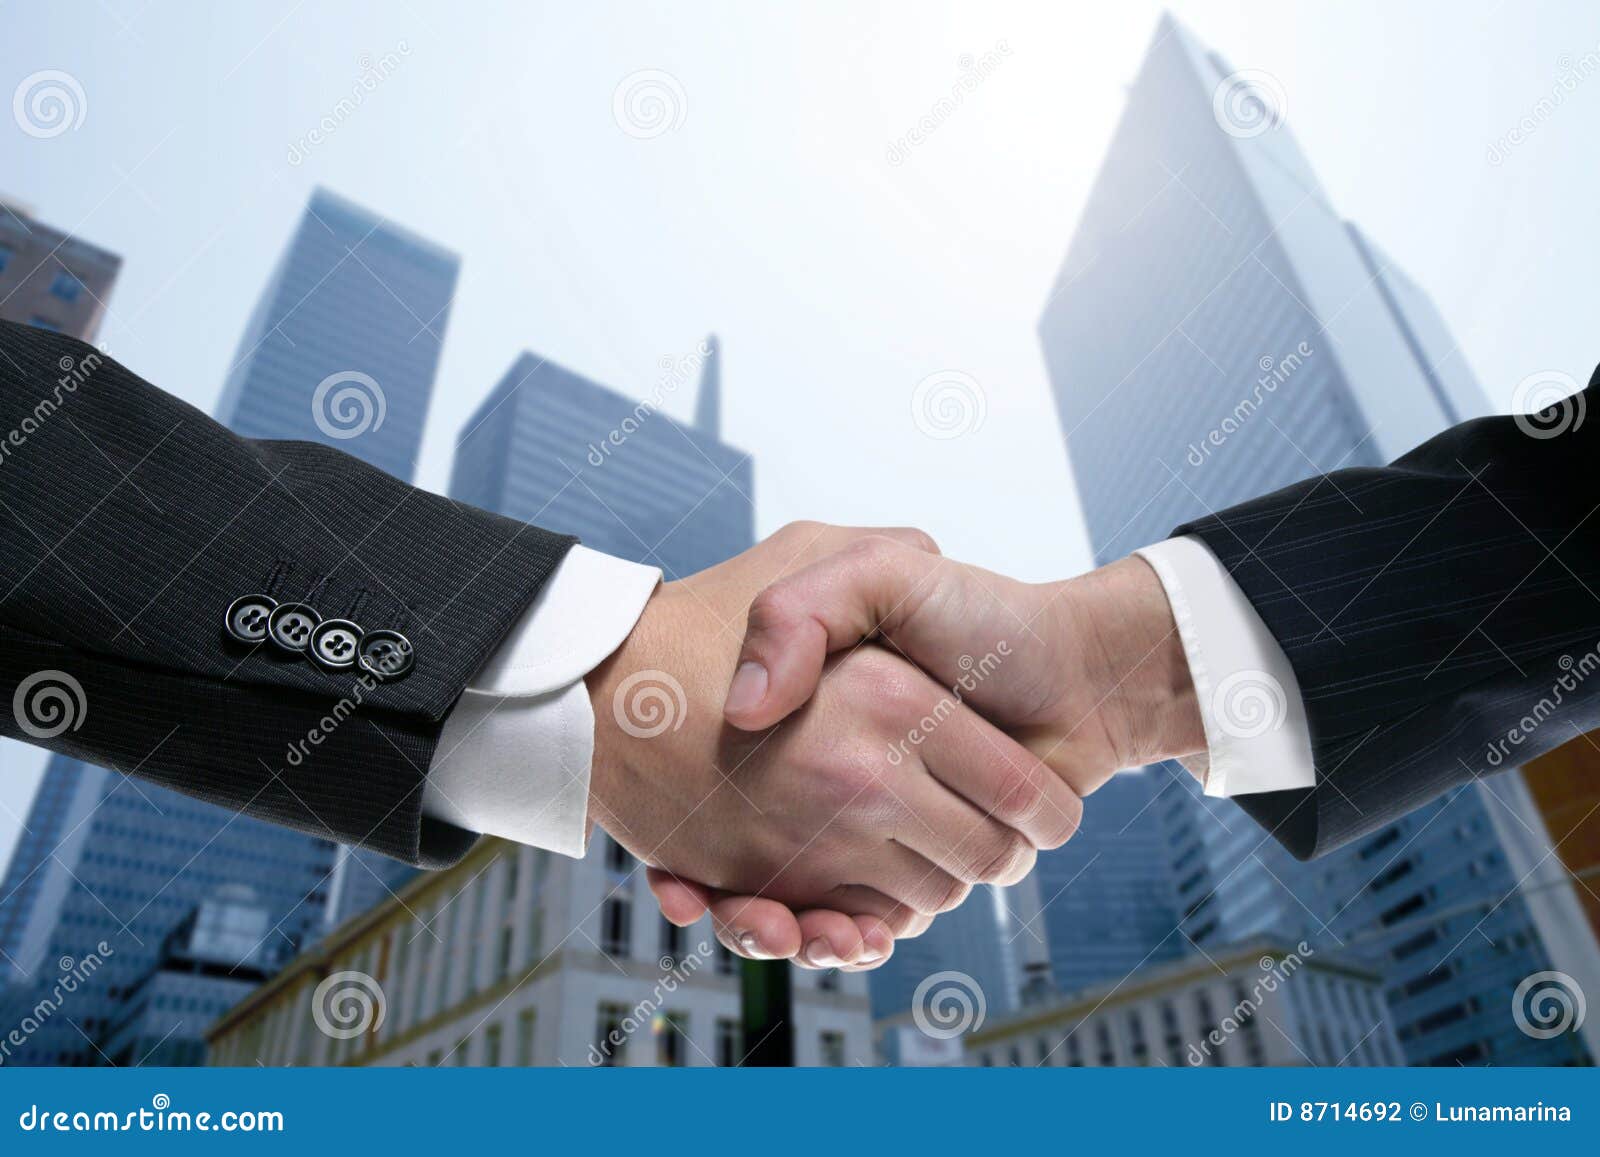 businessman partners shaking hands with suit